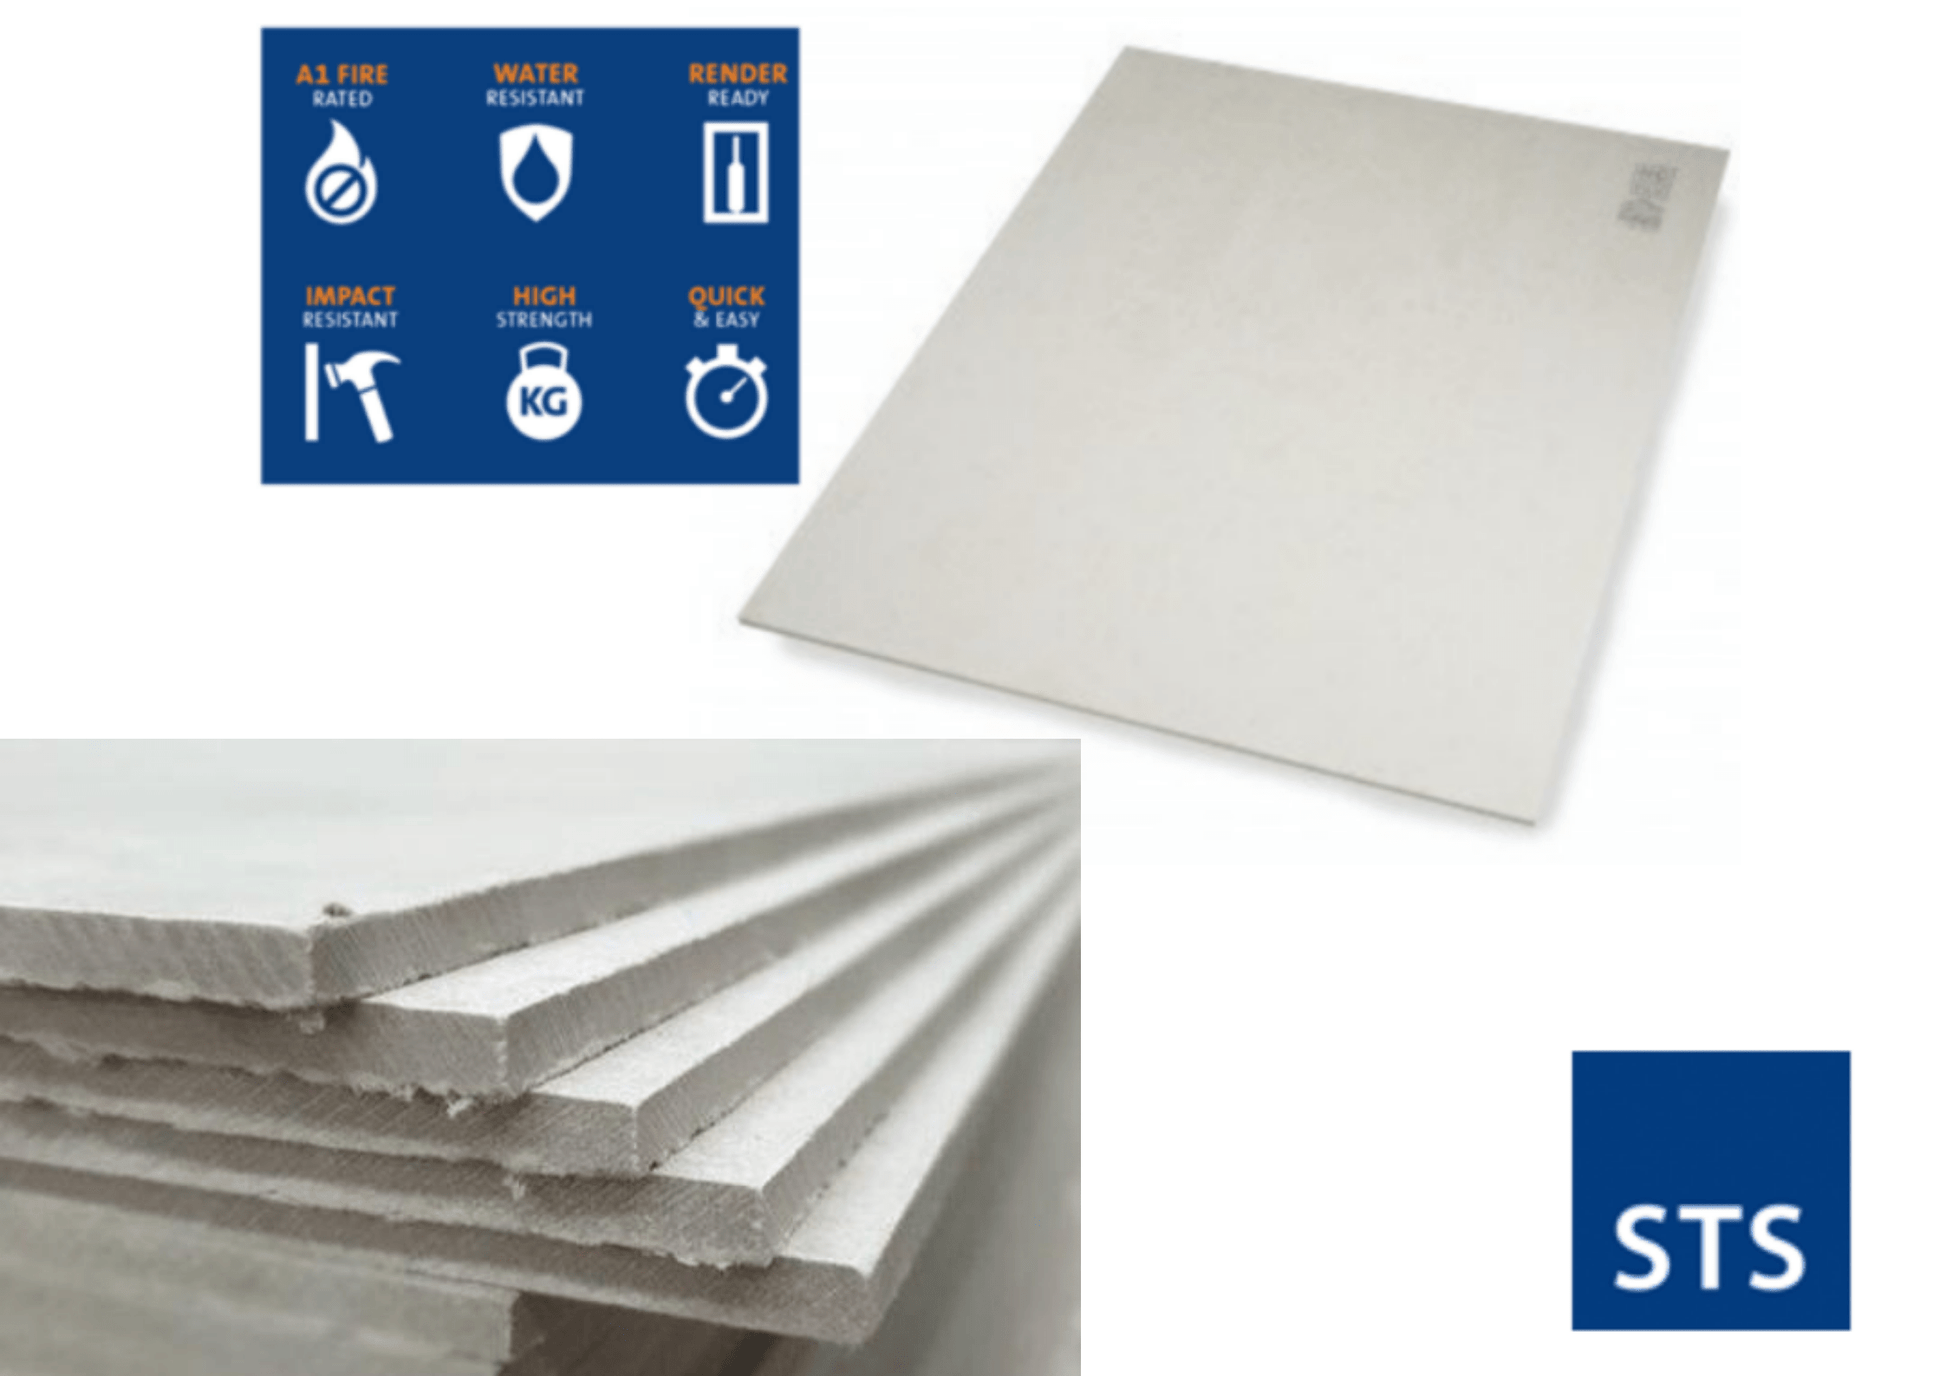 STS STS A1 Fire Rated Render Carrier Construction Cement Board 6mm, 9mm & 12mm STS Carrier Construction Cement Board 6mm, 9mm & 12mm |  Insulationuk.co.uk